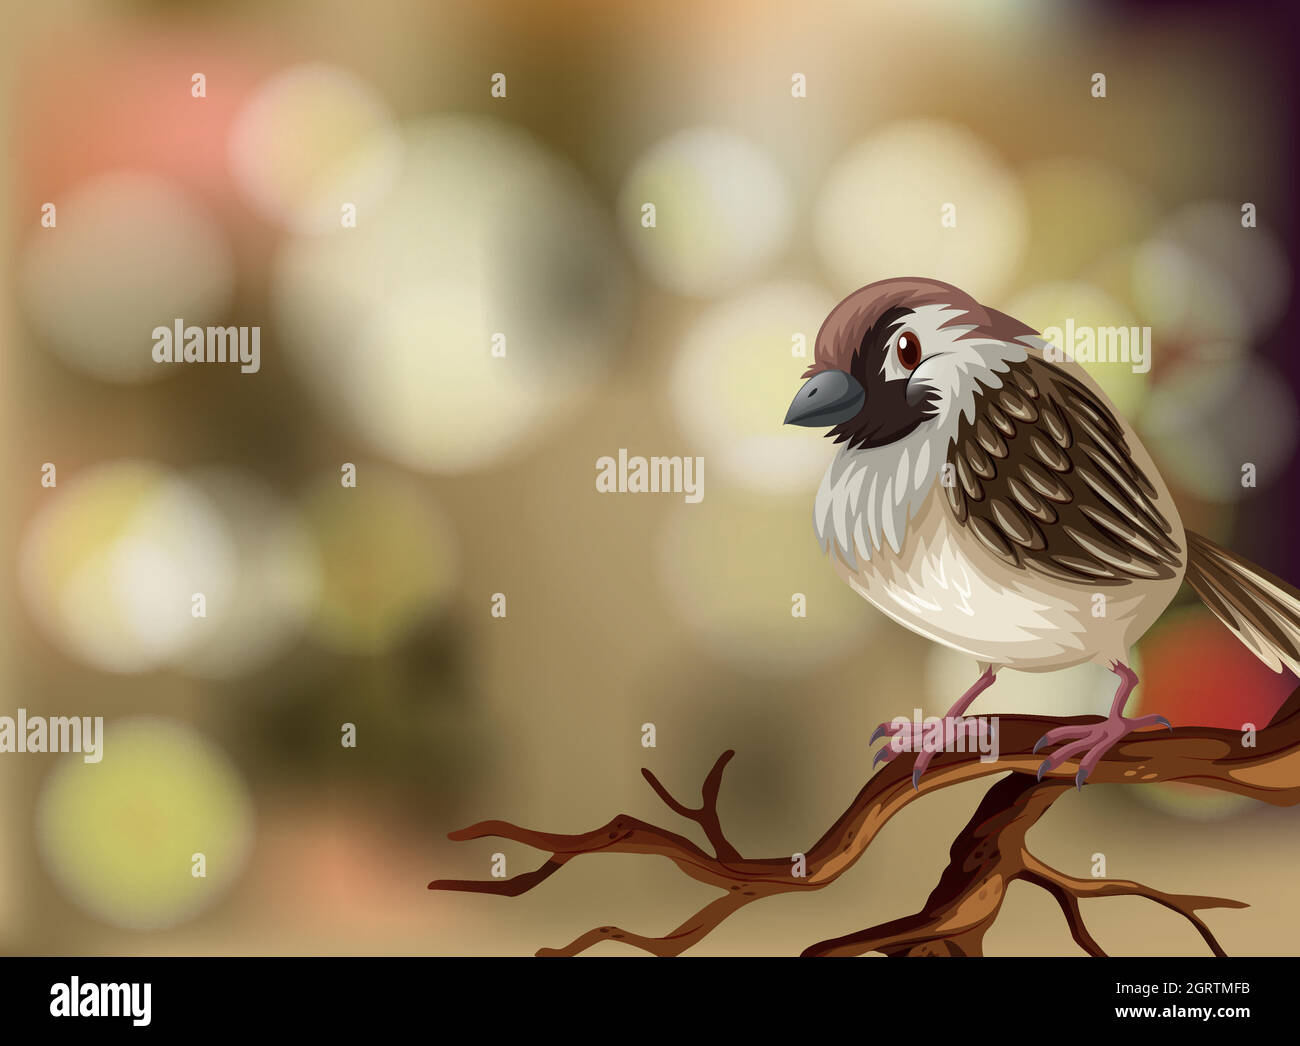 A sparrow on blurry background Stock Vector